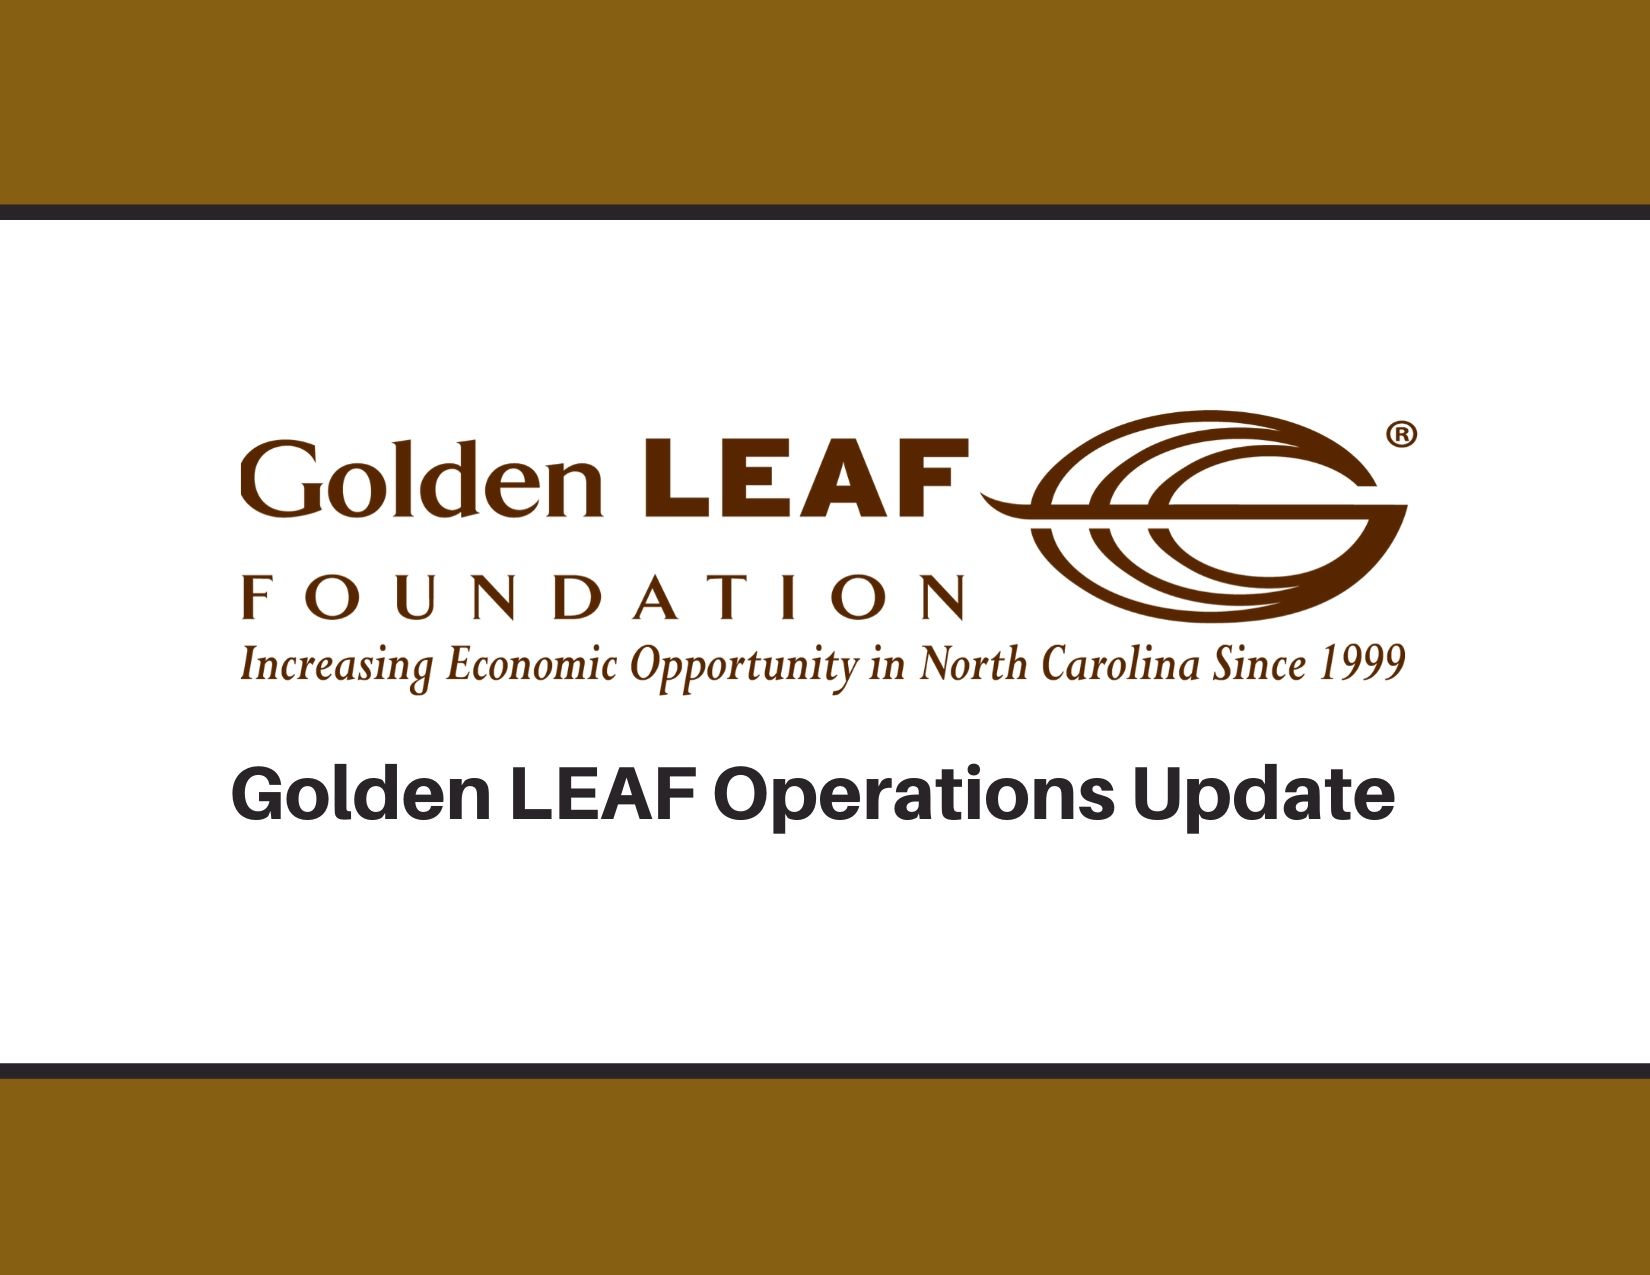 An Update on the Golden LEAF Foundation Operations